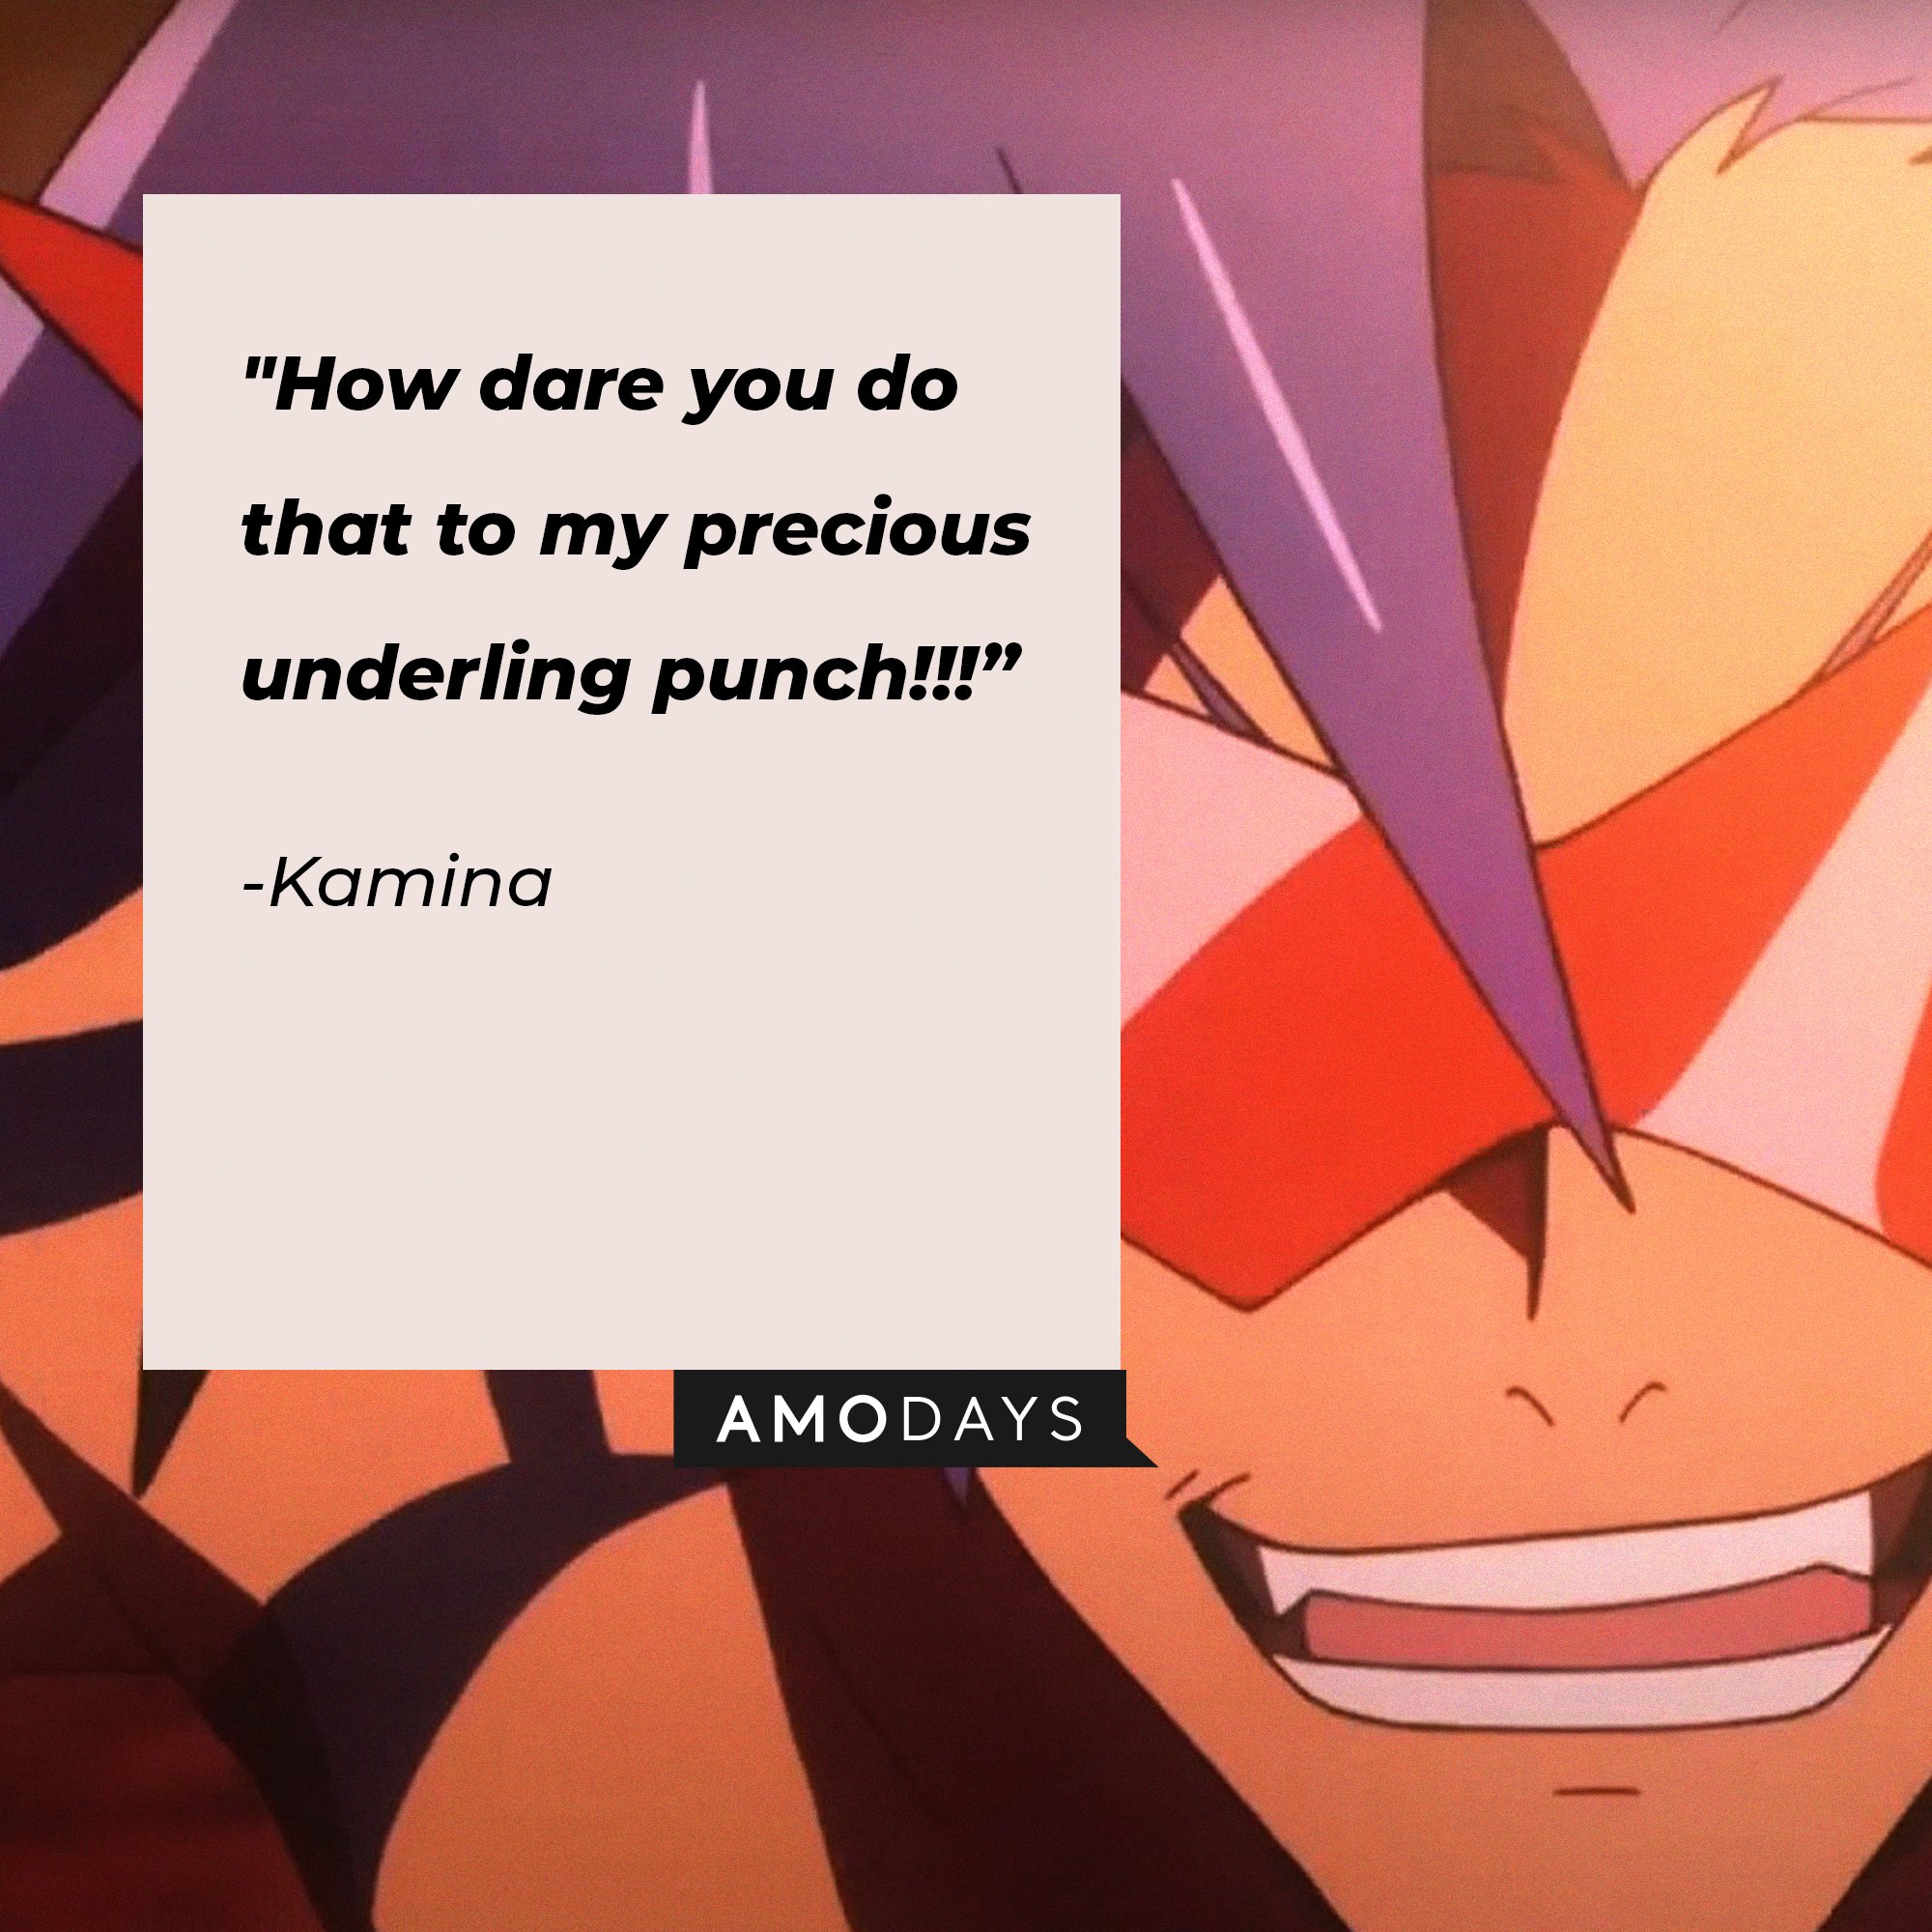 Kamina's quote: "How dare you do that to my precious underling punch!!!" | Image: AmoDays    